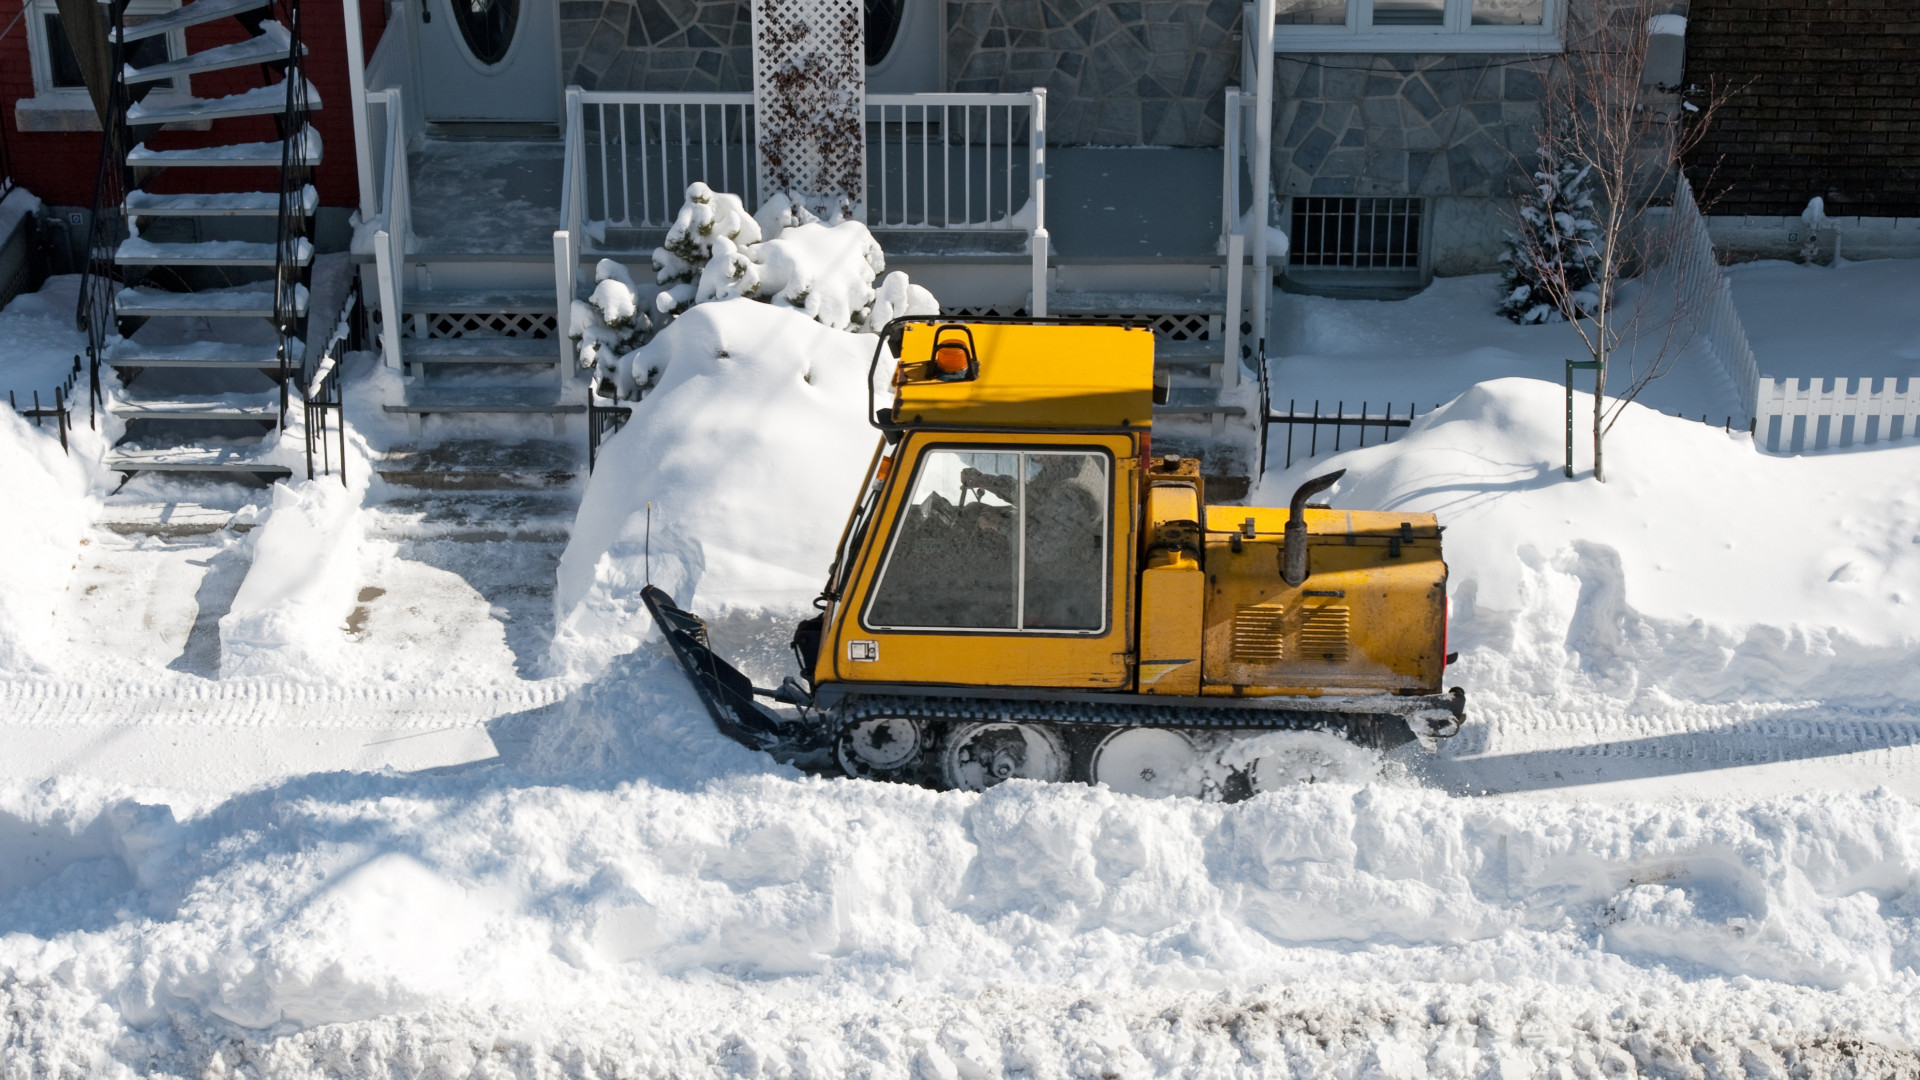 An offer of adapted services for snow removal and landscaping vehicles